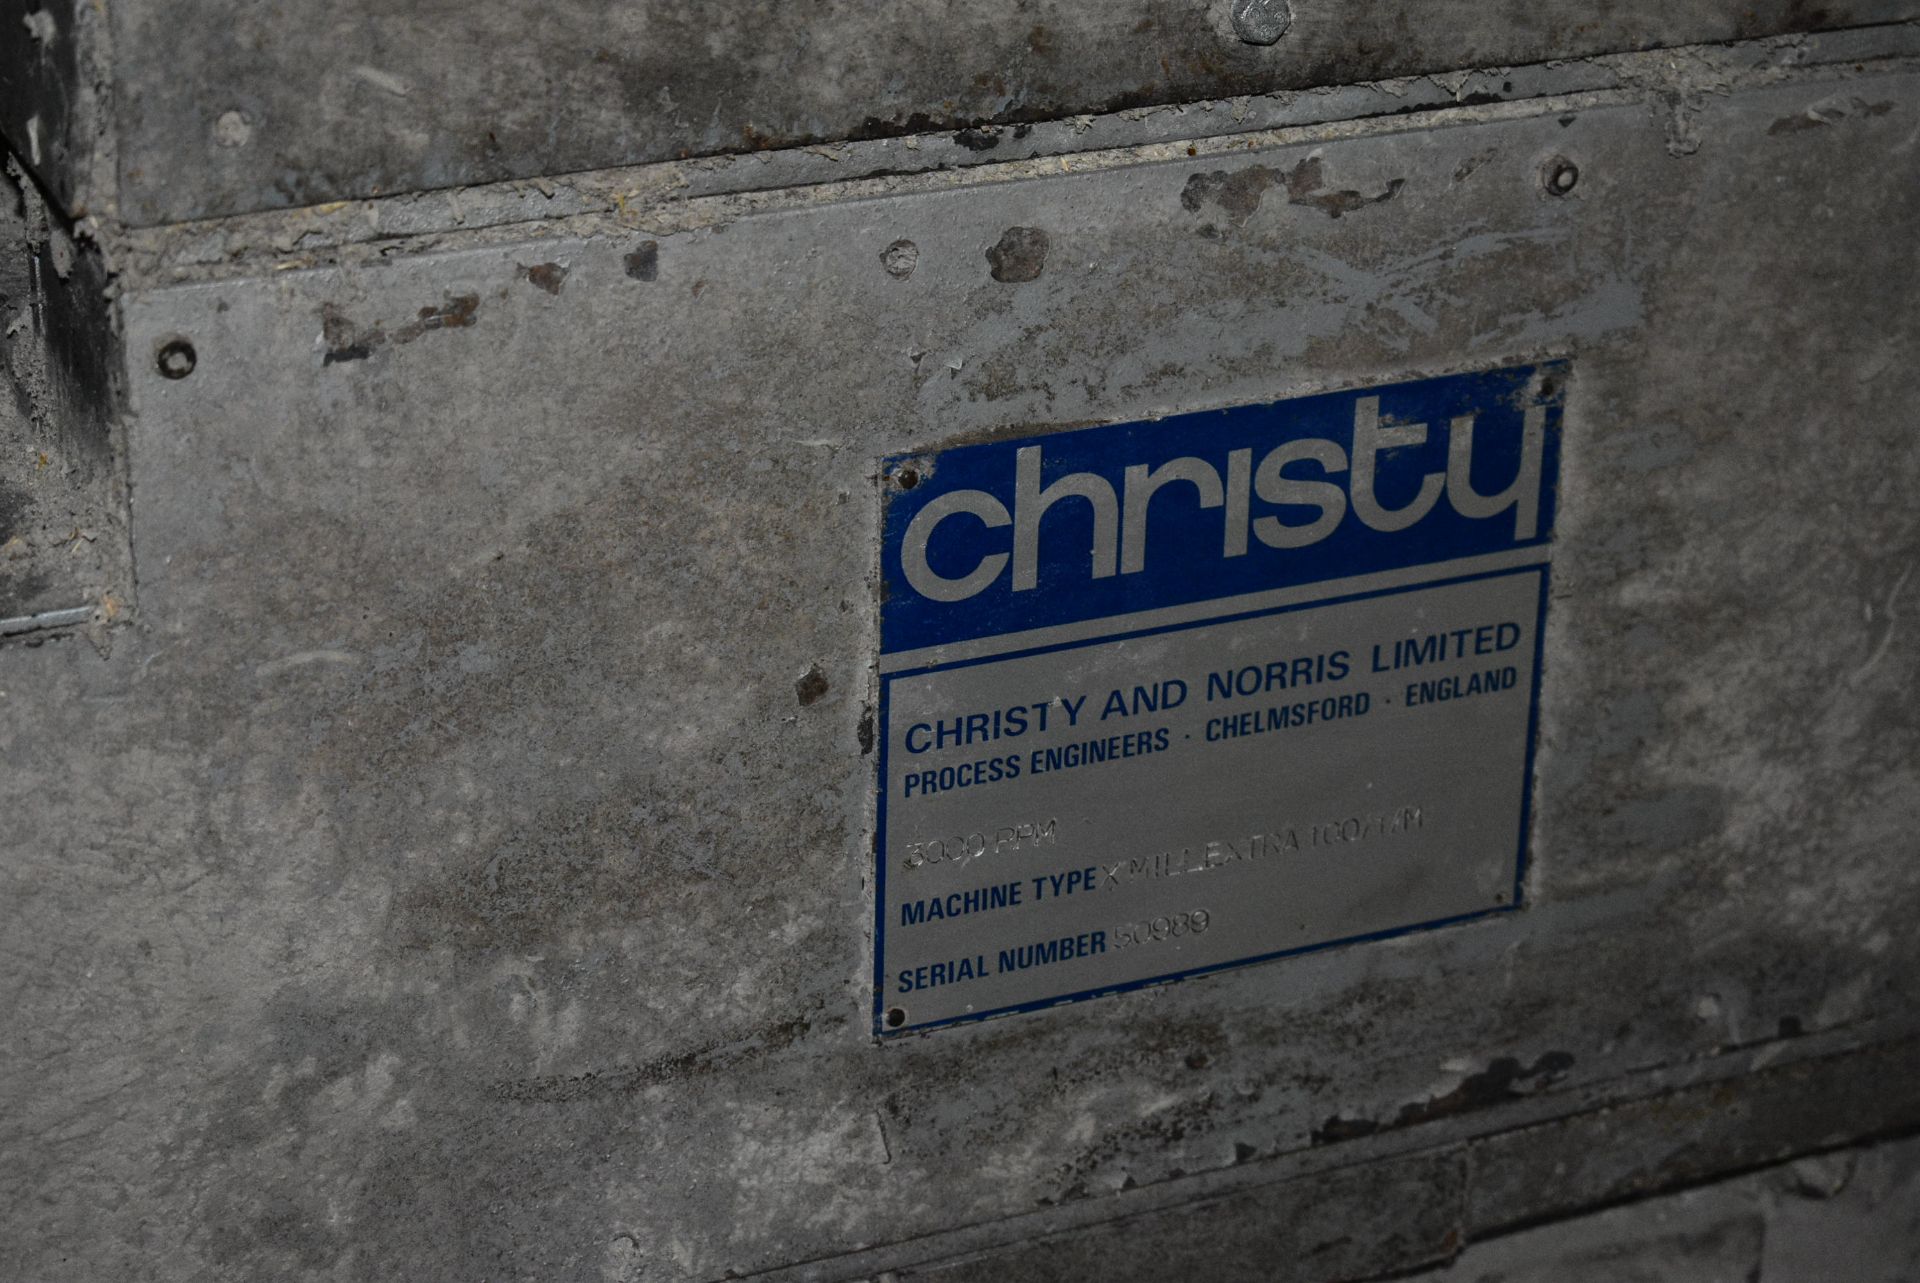 Christy and Norris X MILL EXTRA 100/1/M REVERSIBLE HAMMER MILL, serial no. 50989, fitted Brook - Image 6 of 8